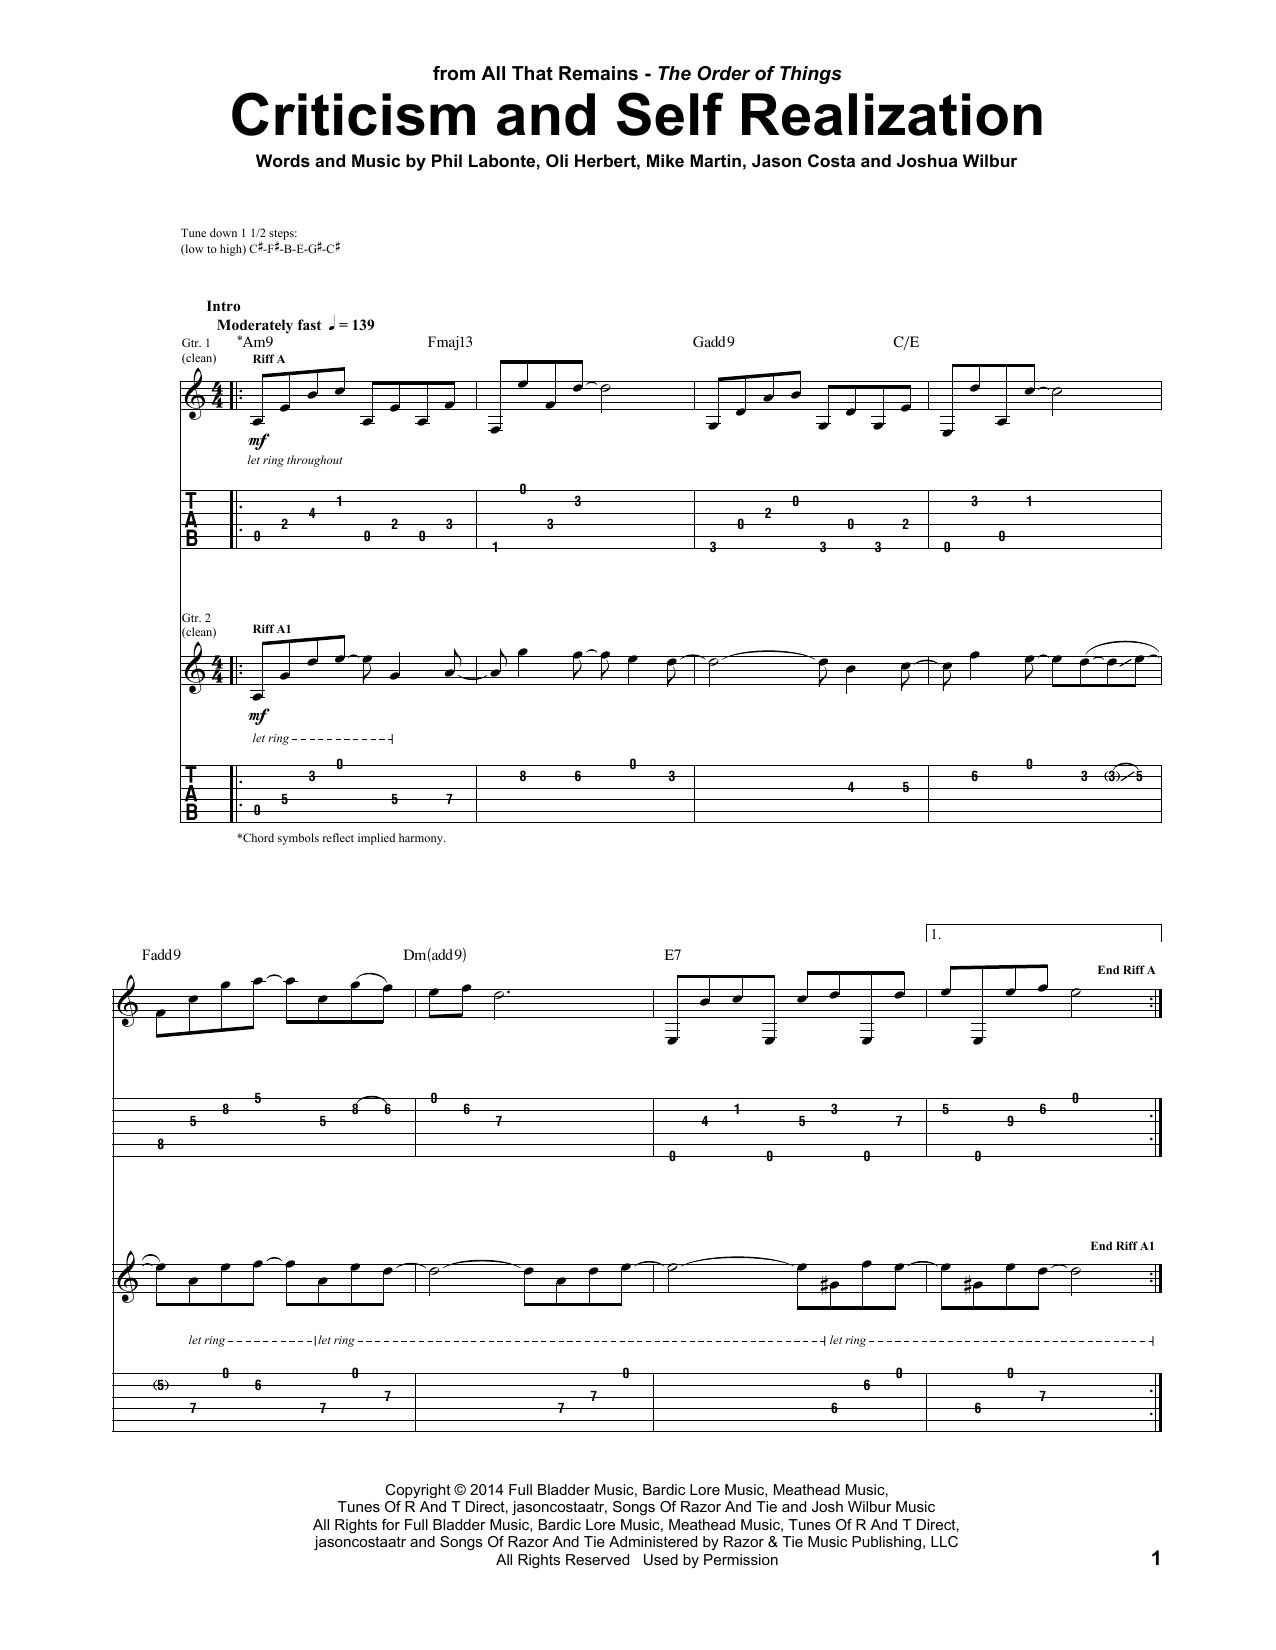 Download All That Remains Criticism And Self Realization Sheet Music